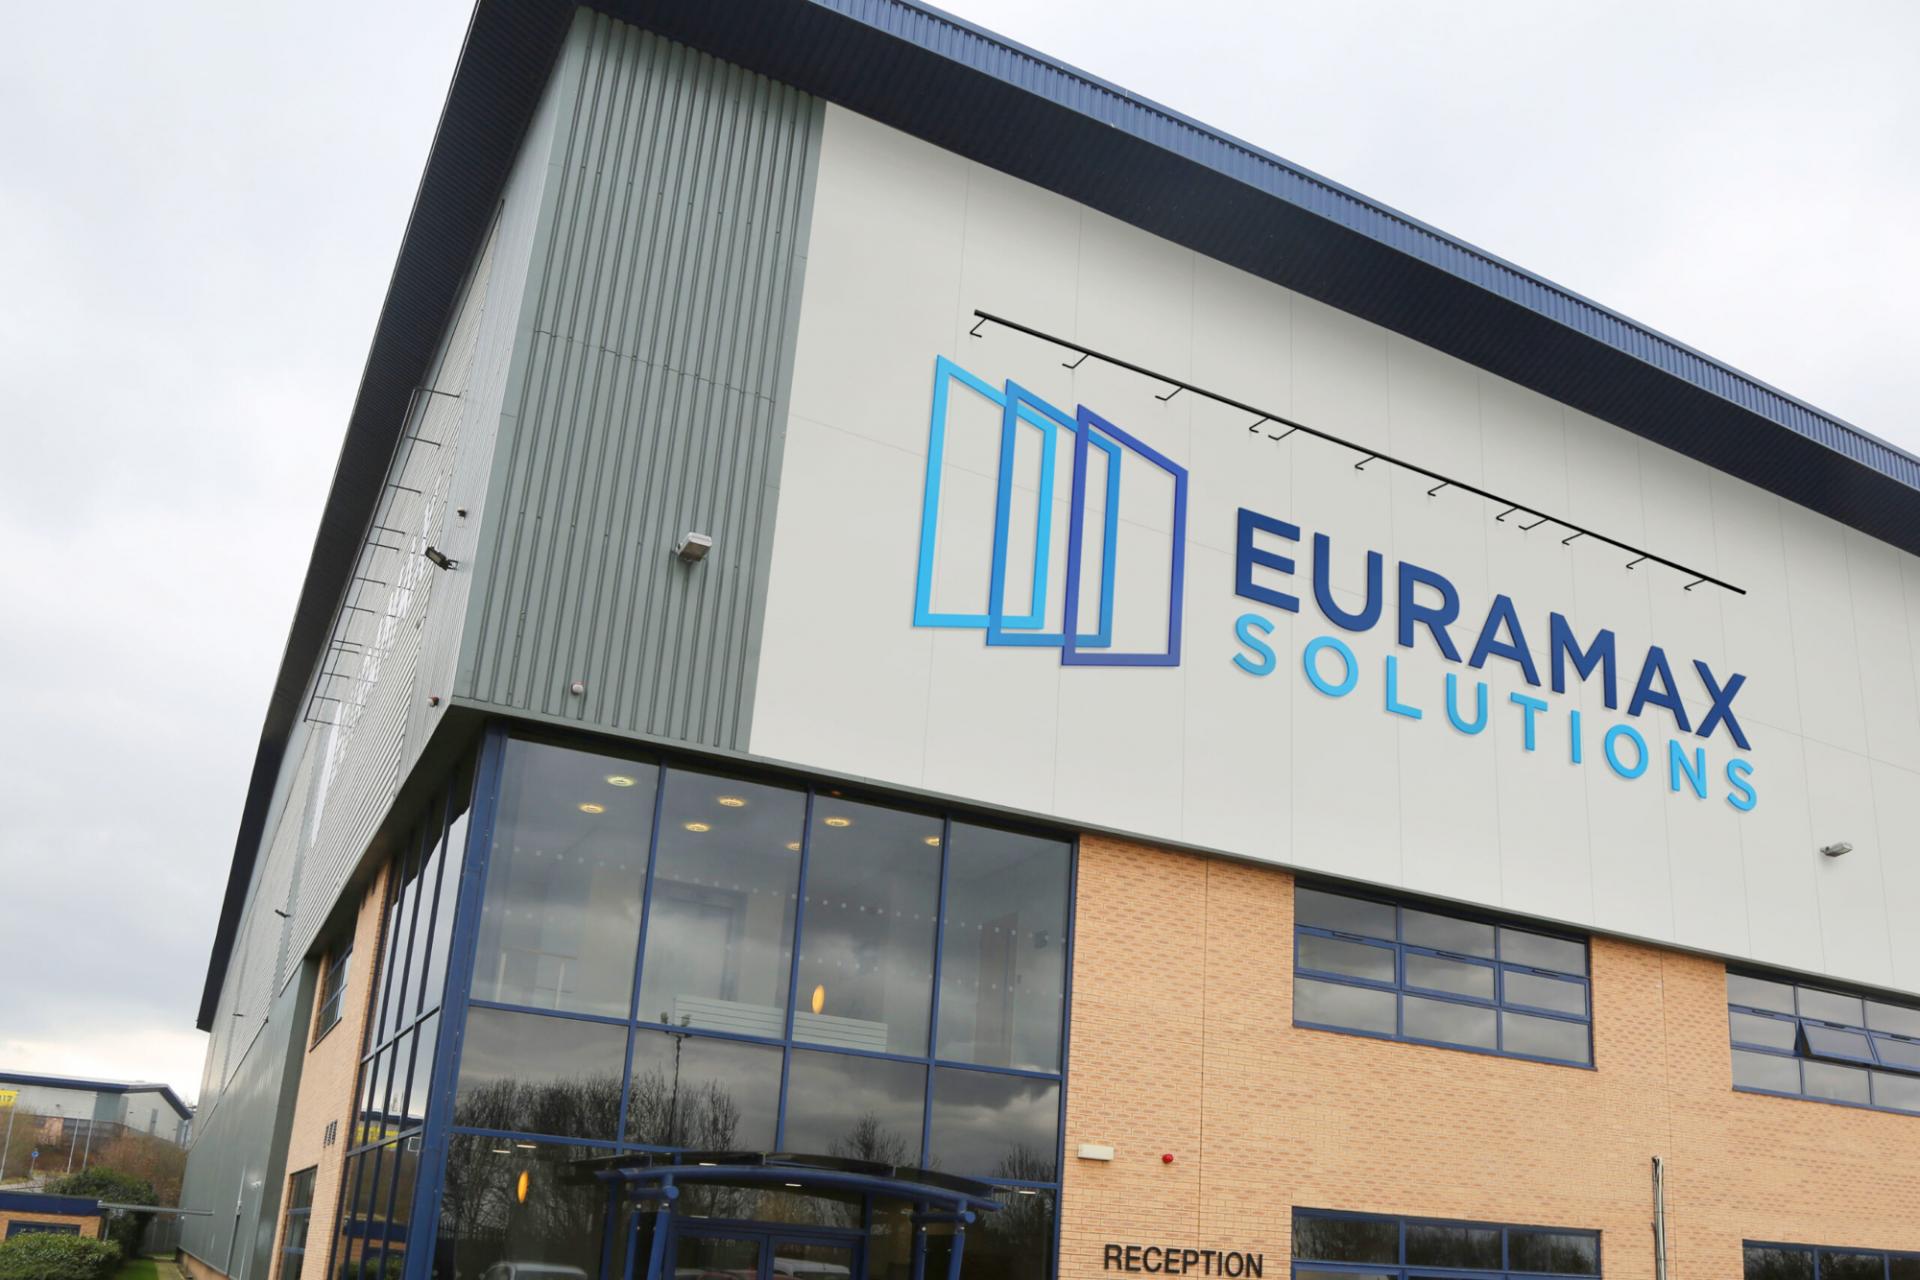 £26.5m-turnover window and door manufacturer enters administration